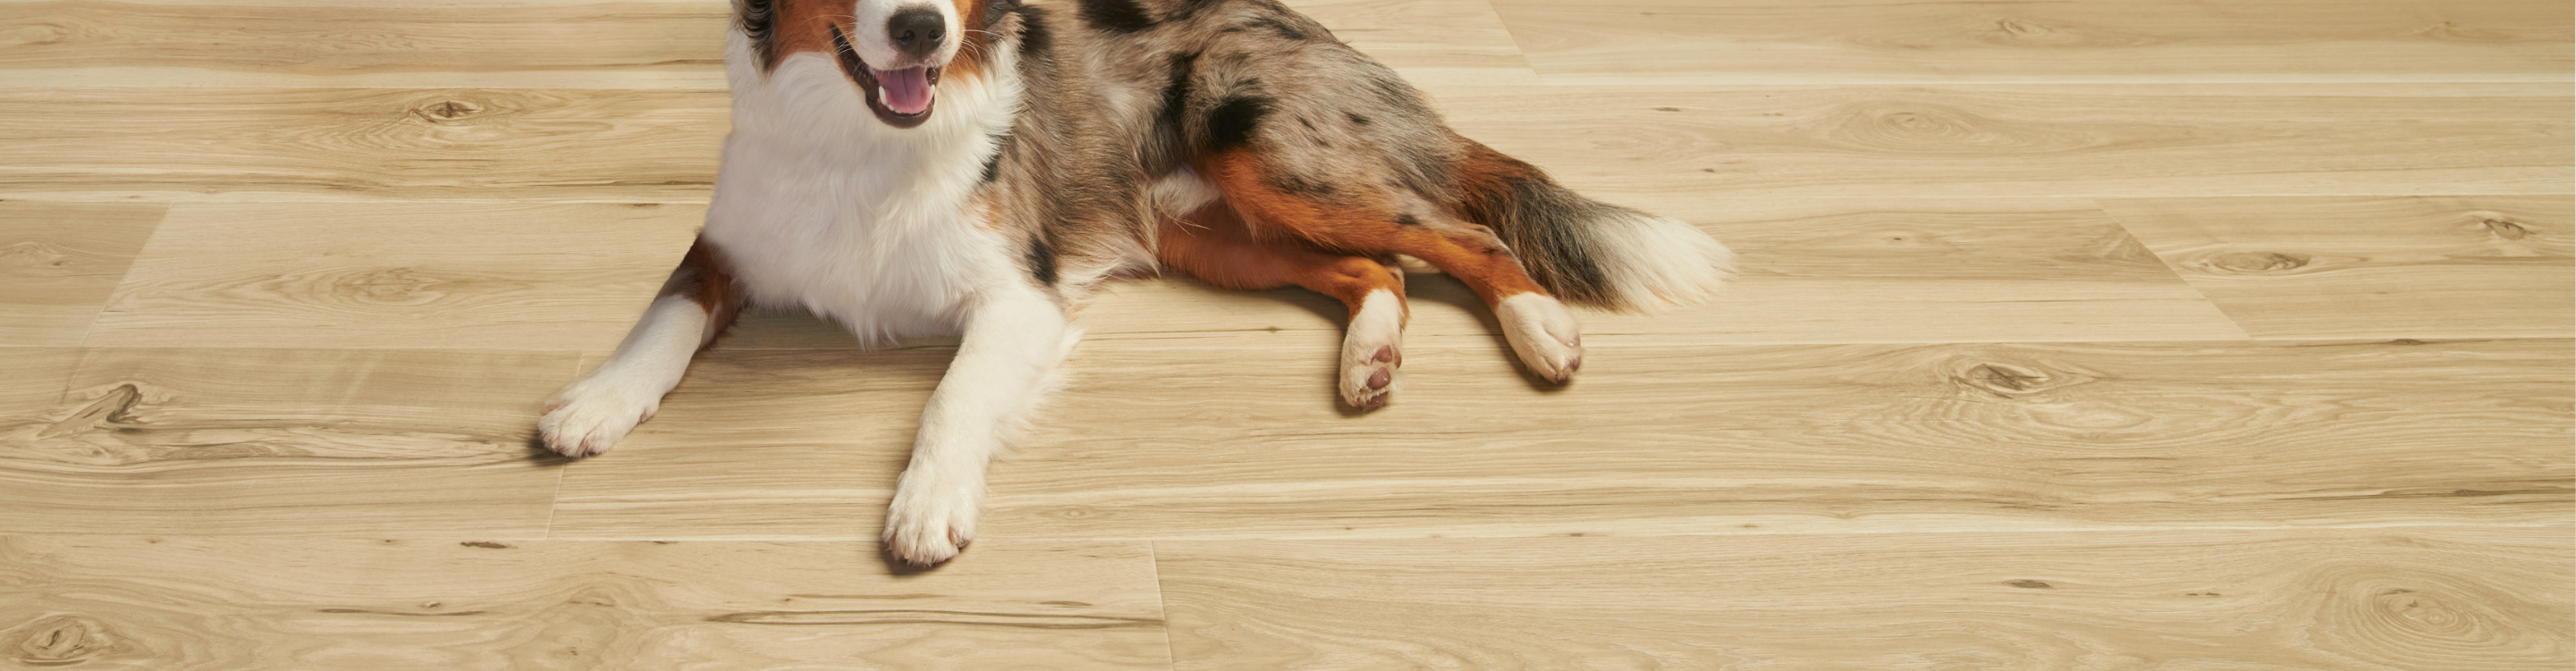 Laminate Flooring with Dog Laying Down